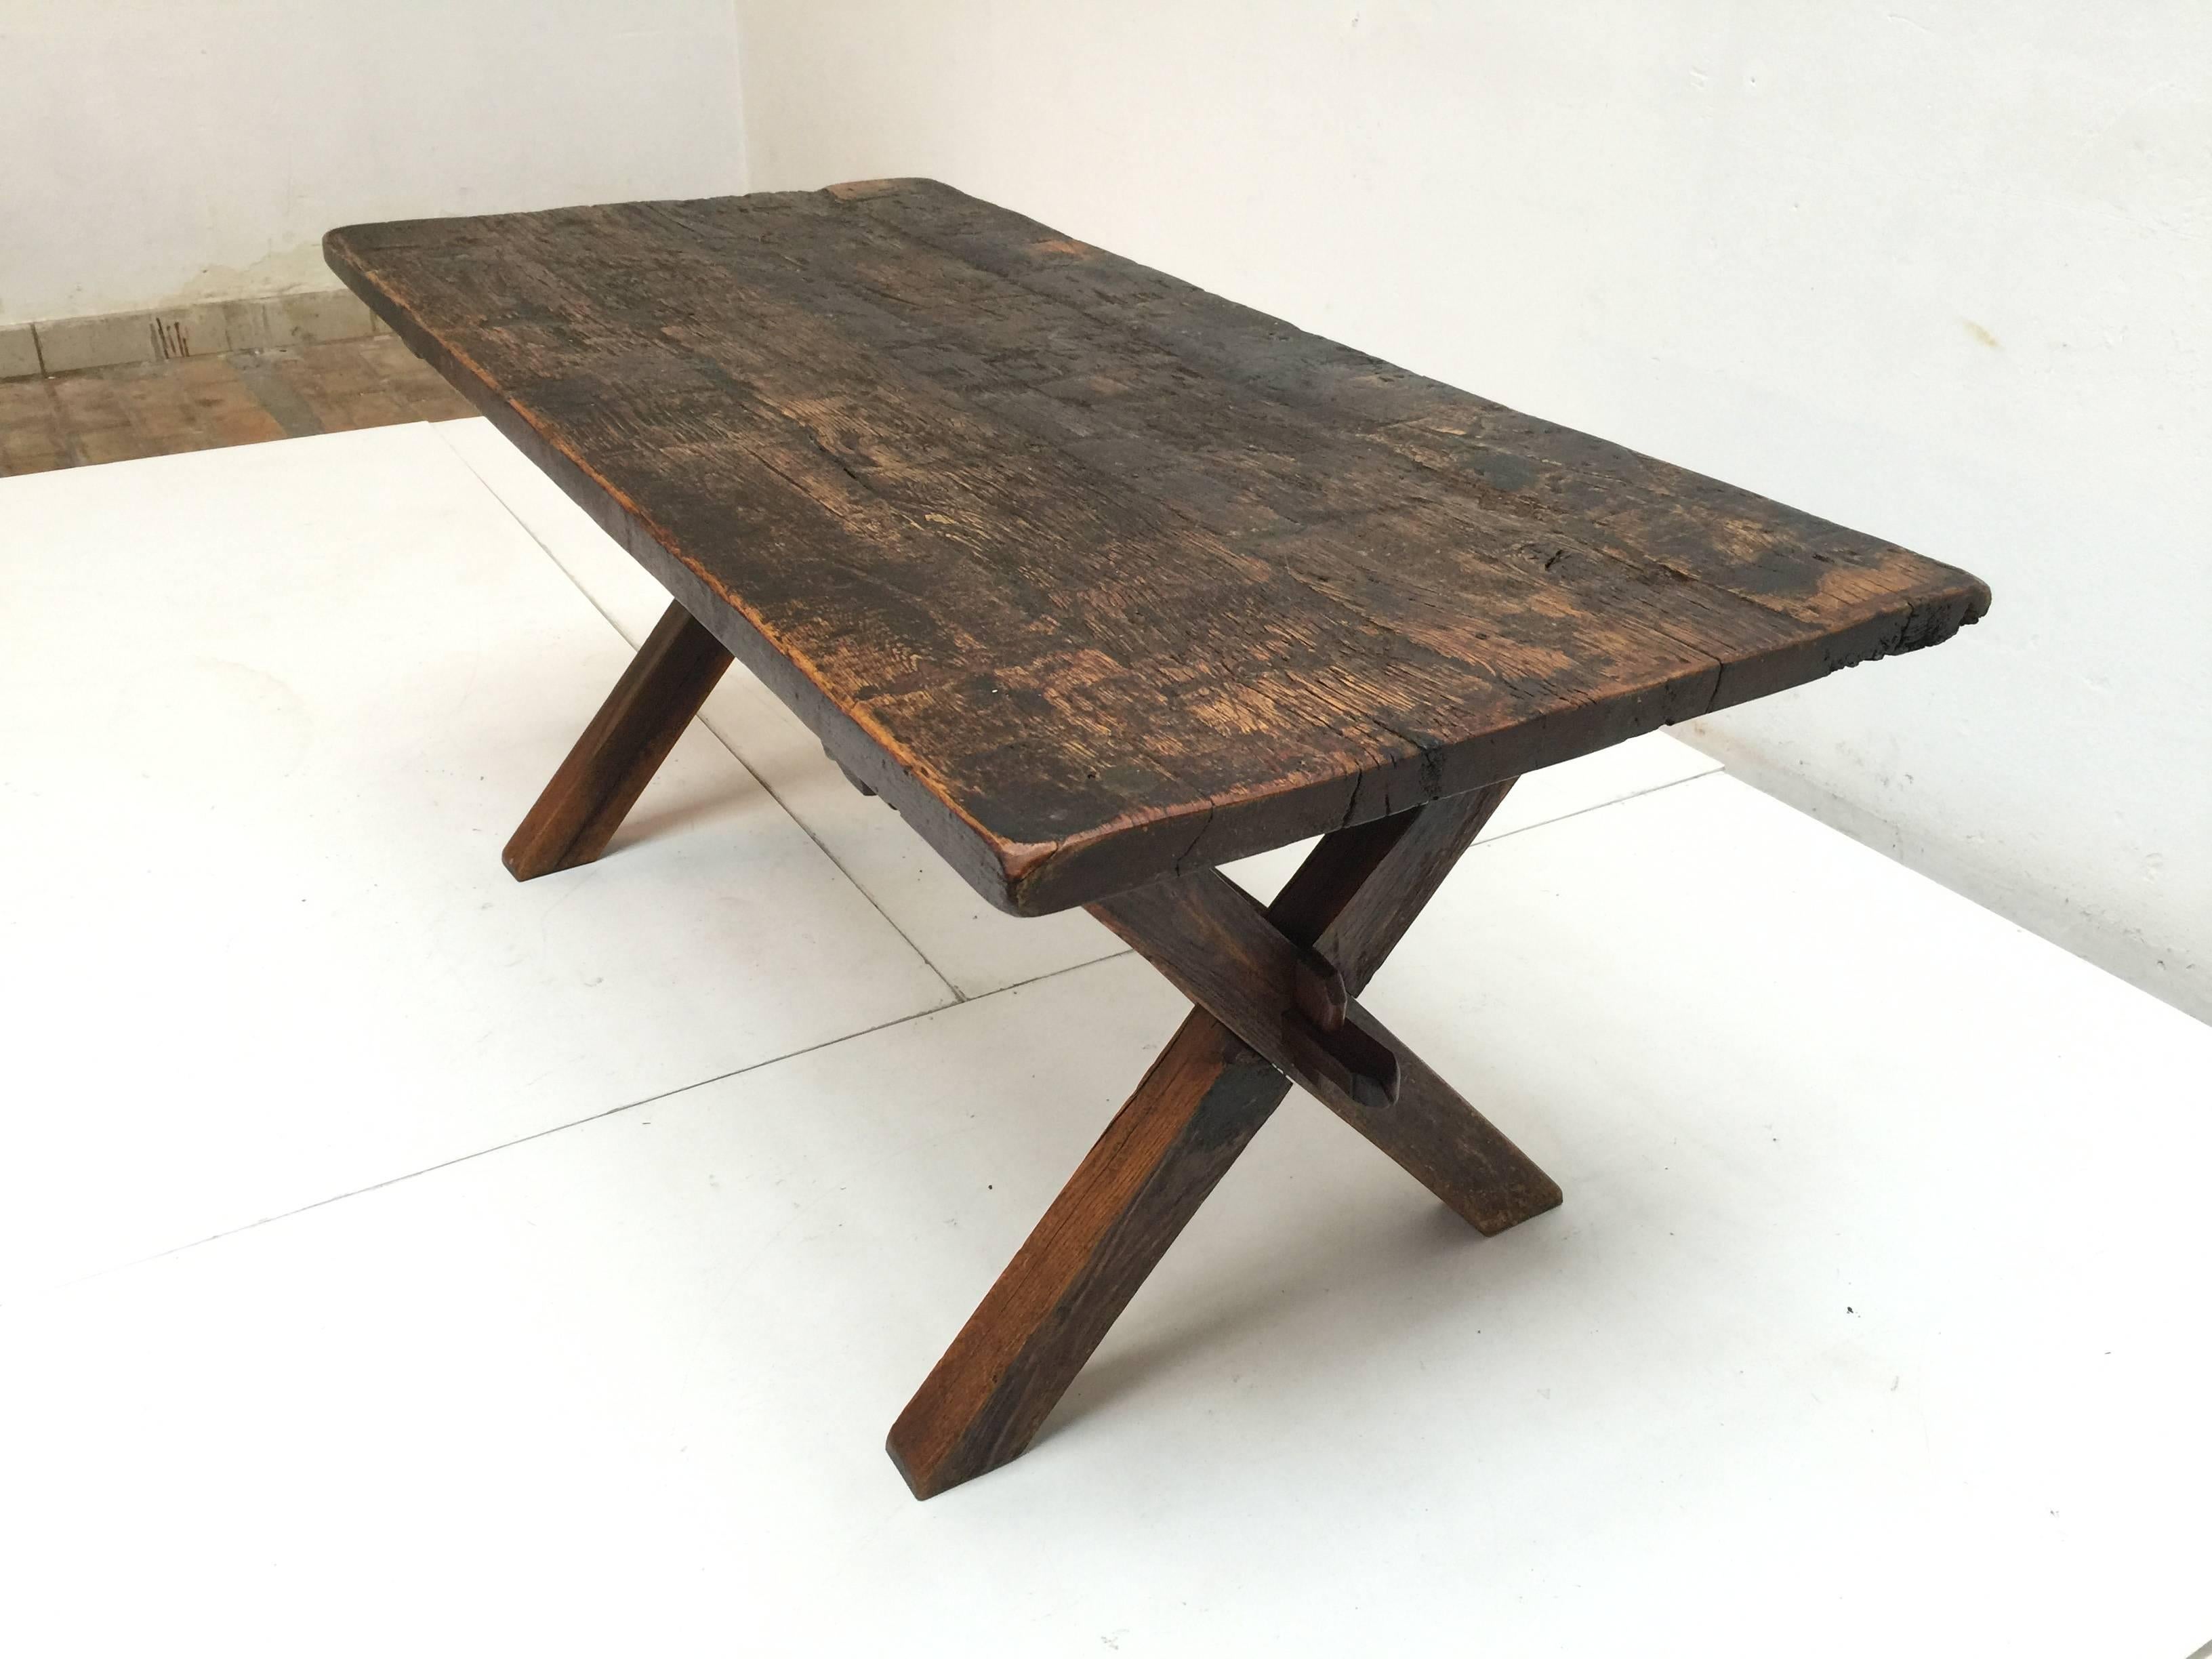 Brutalist looking French rustic stained oak dining table. 

The raw finished solid stained oak has a beautiful aged and patinated look that is reminiscent to the works of French designer Pierre Chapo.

